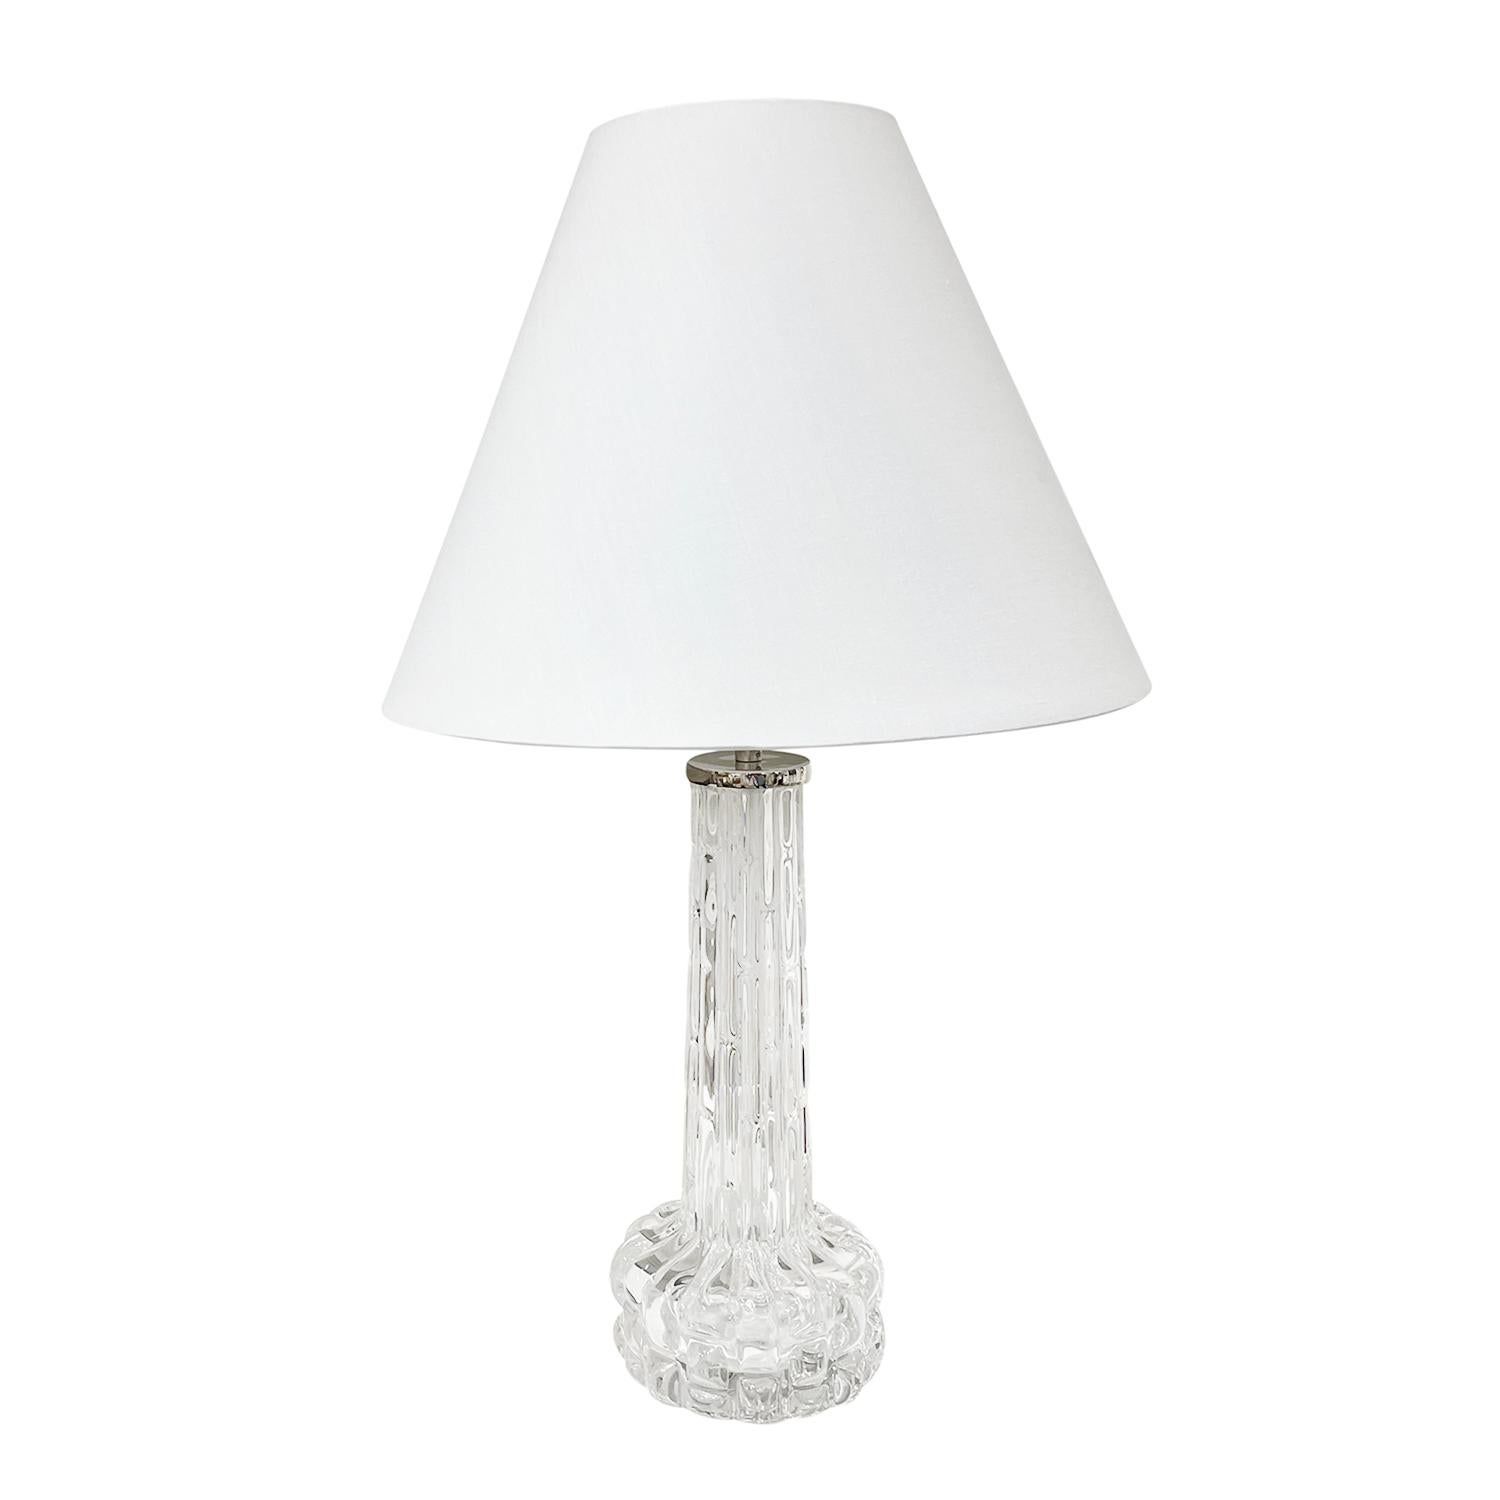 A vintage Mid-Century Modern Swedish desk lamp with a new white round shade, made of hand blown clear Orrefors glass, designed by Carl Fagerlund and produced, signed by Orrefors in good condition. The Scandinavian table light is enhanced with a